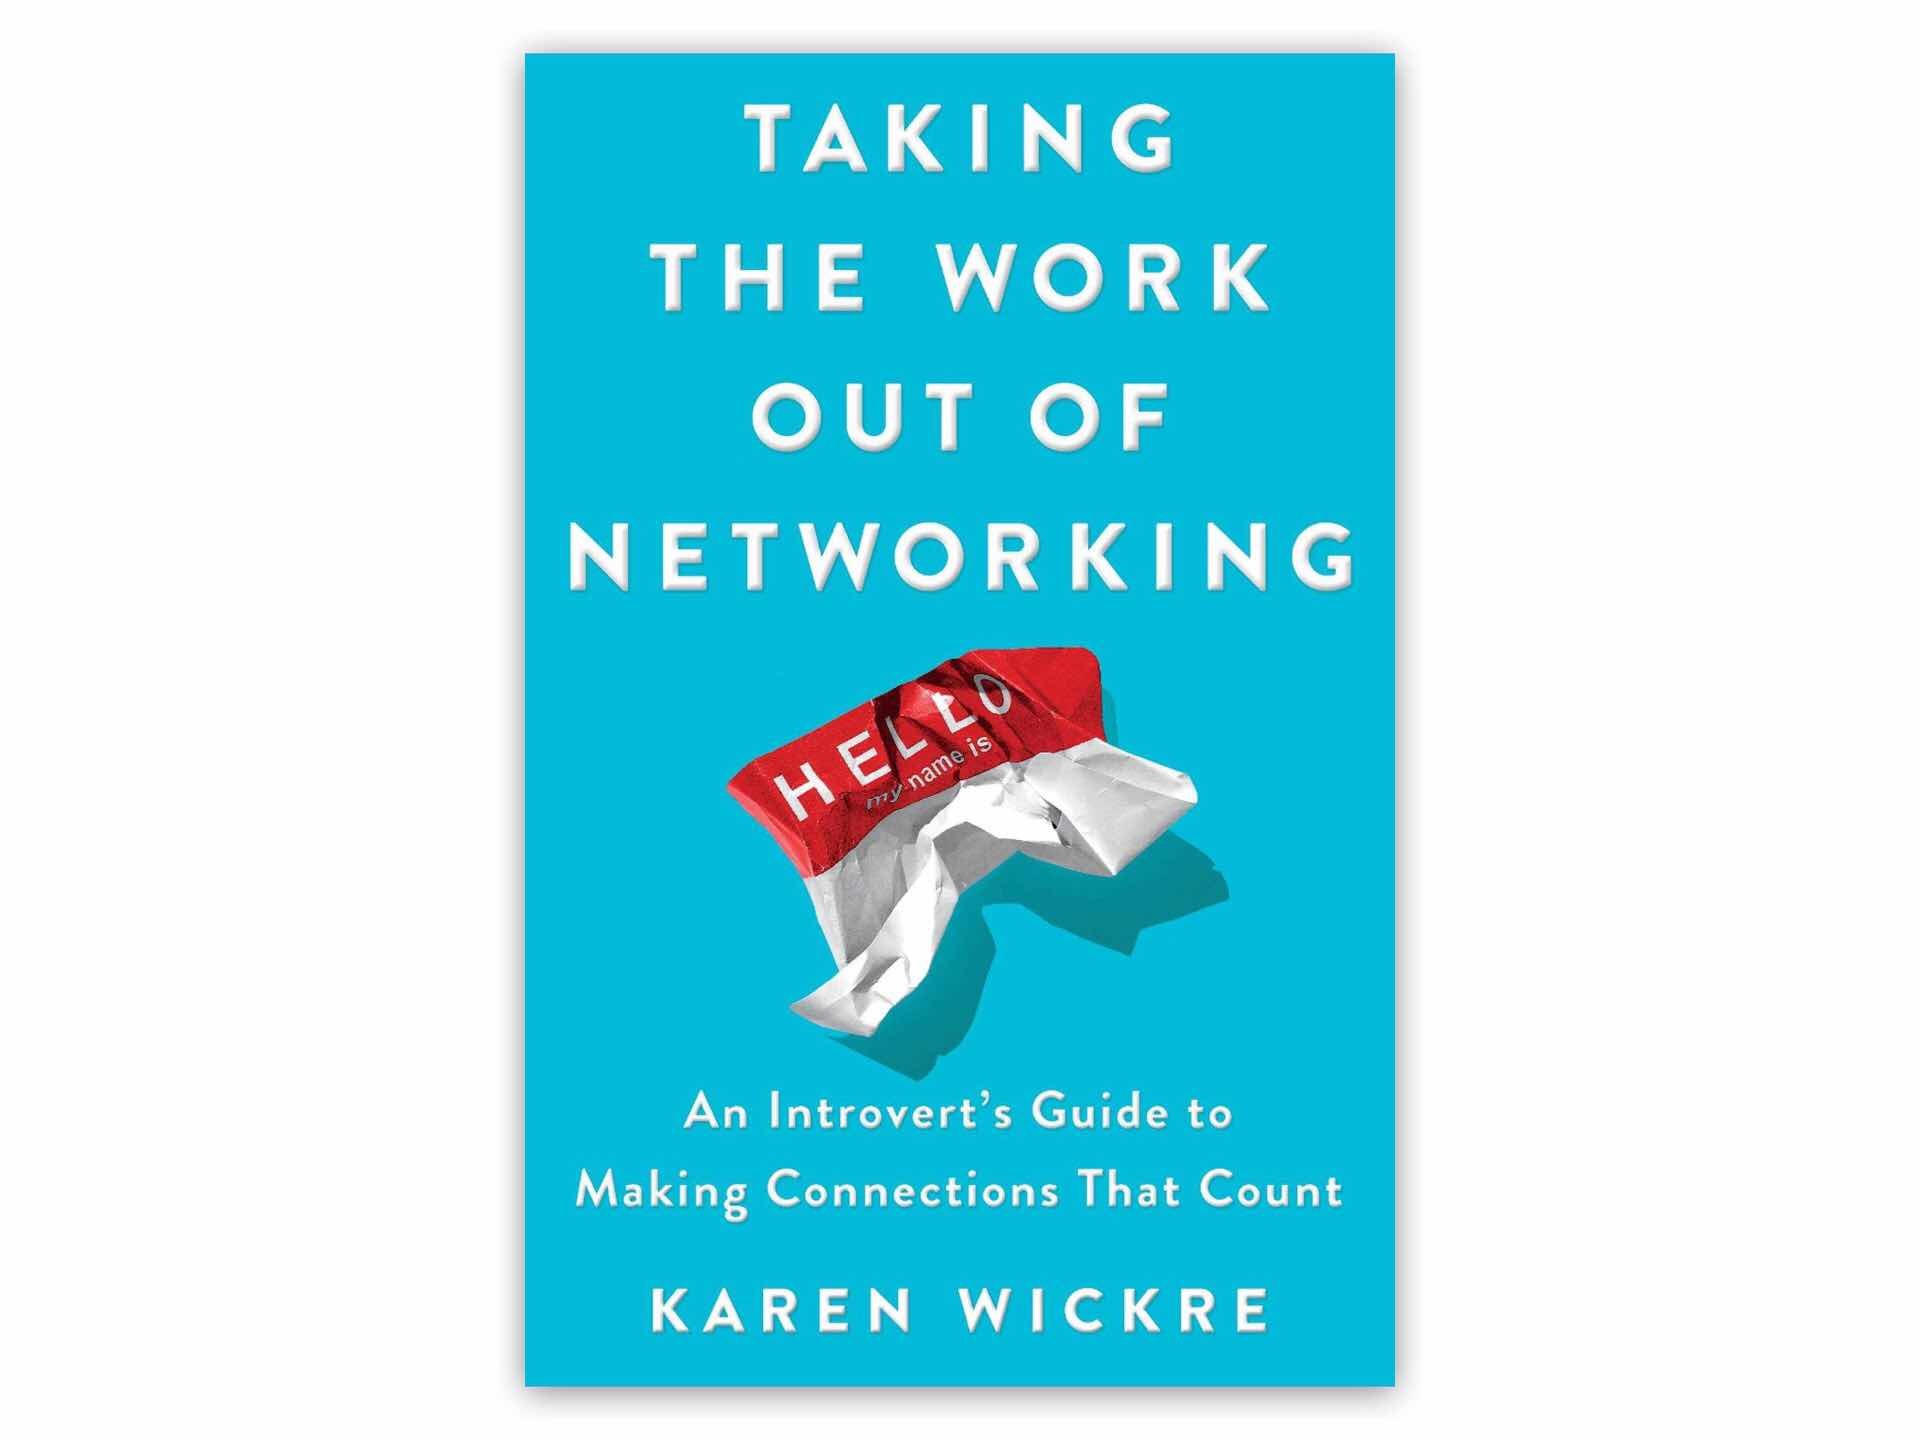 Taking the Work Out of Networking by Karen Wickre. ($16 hardcover, $16 paperback)